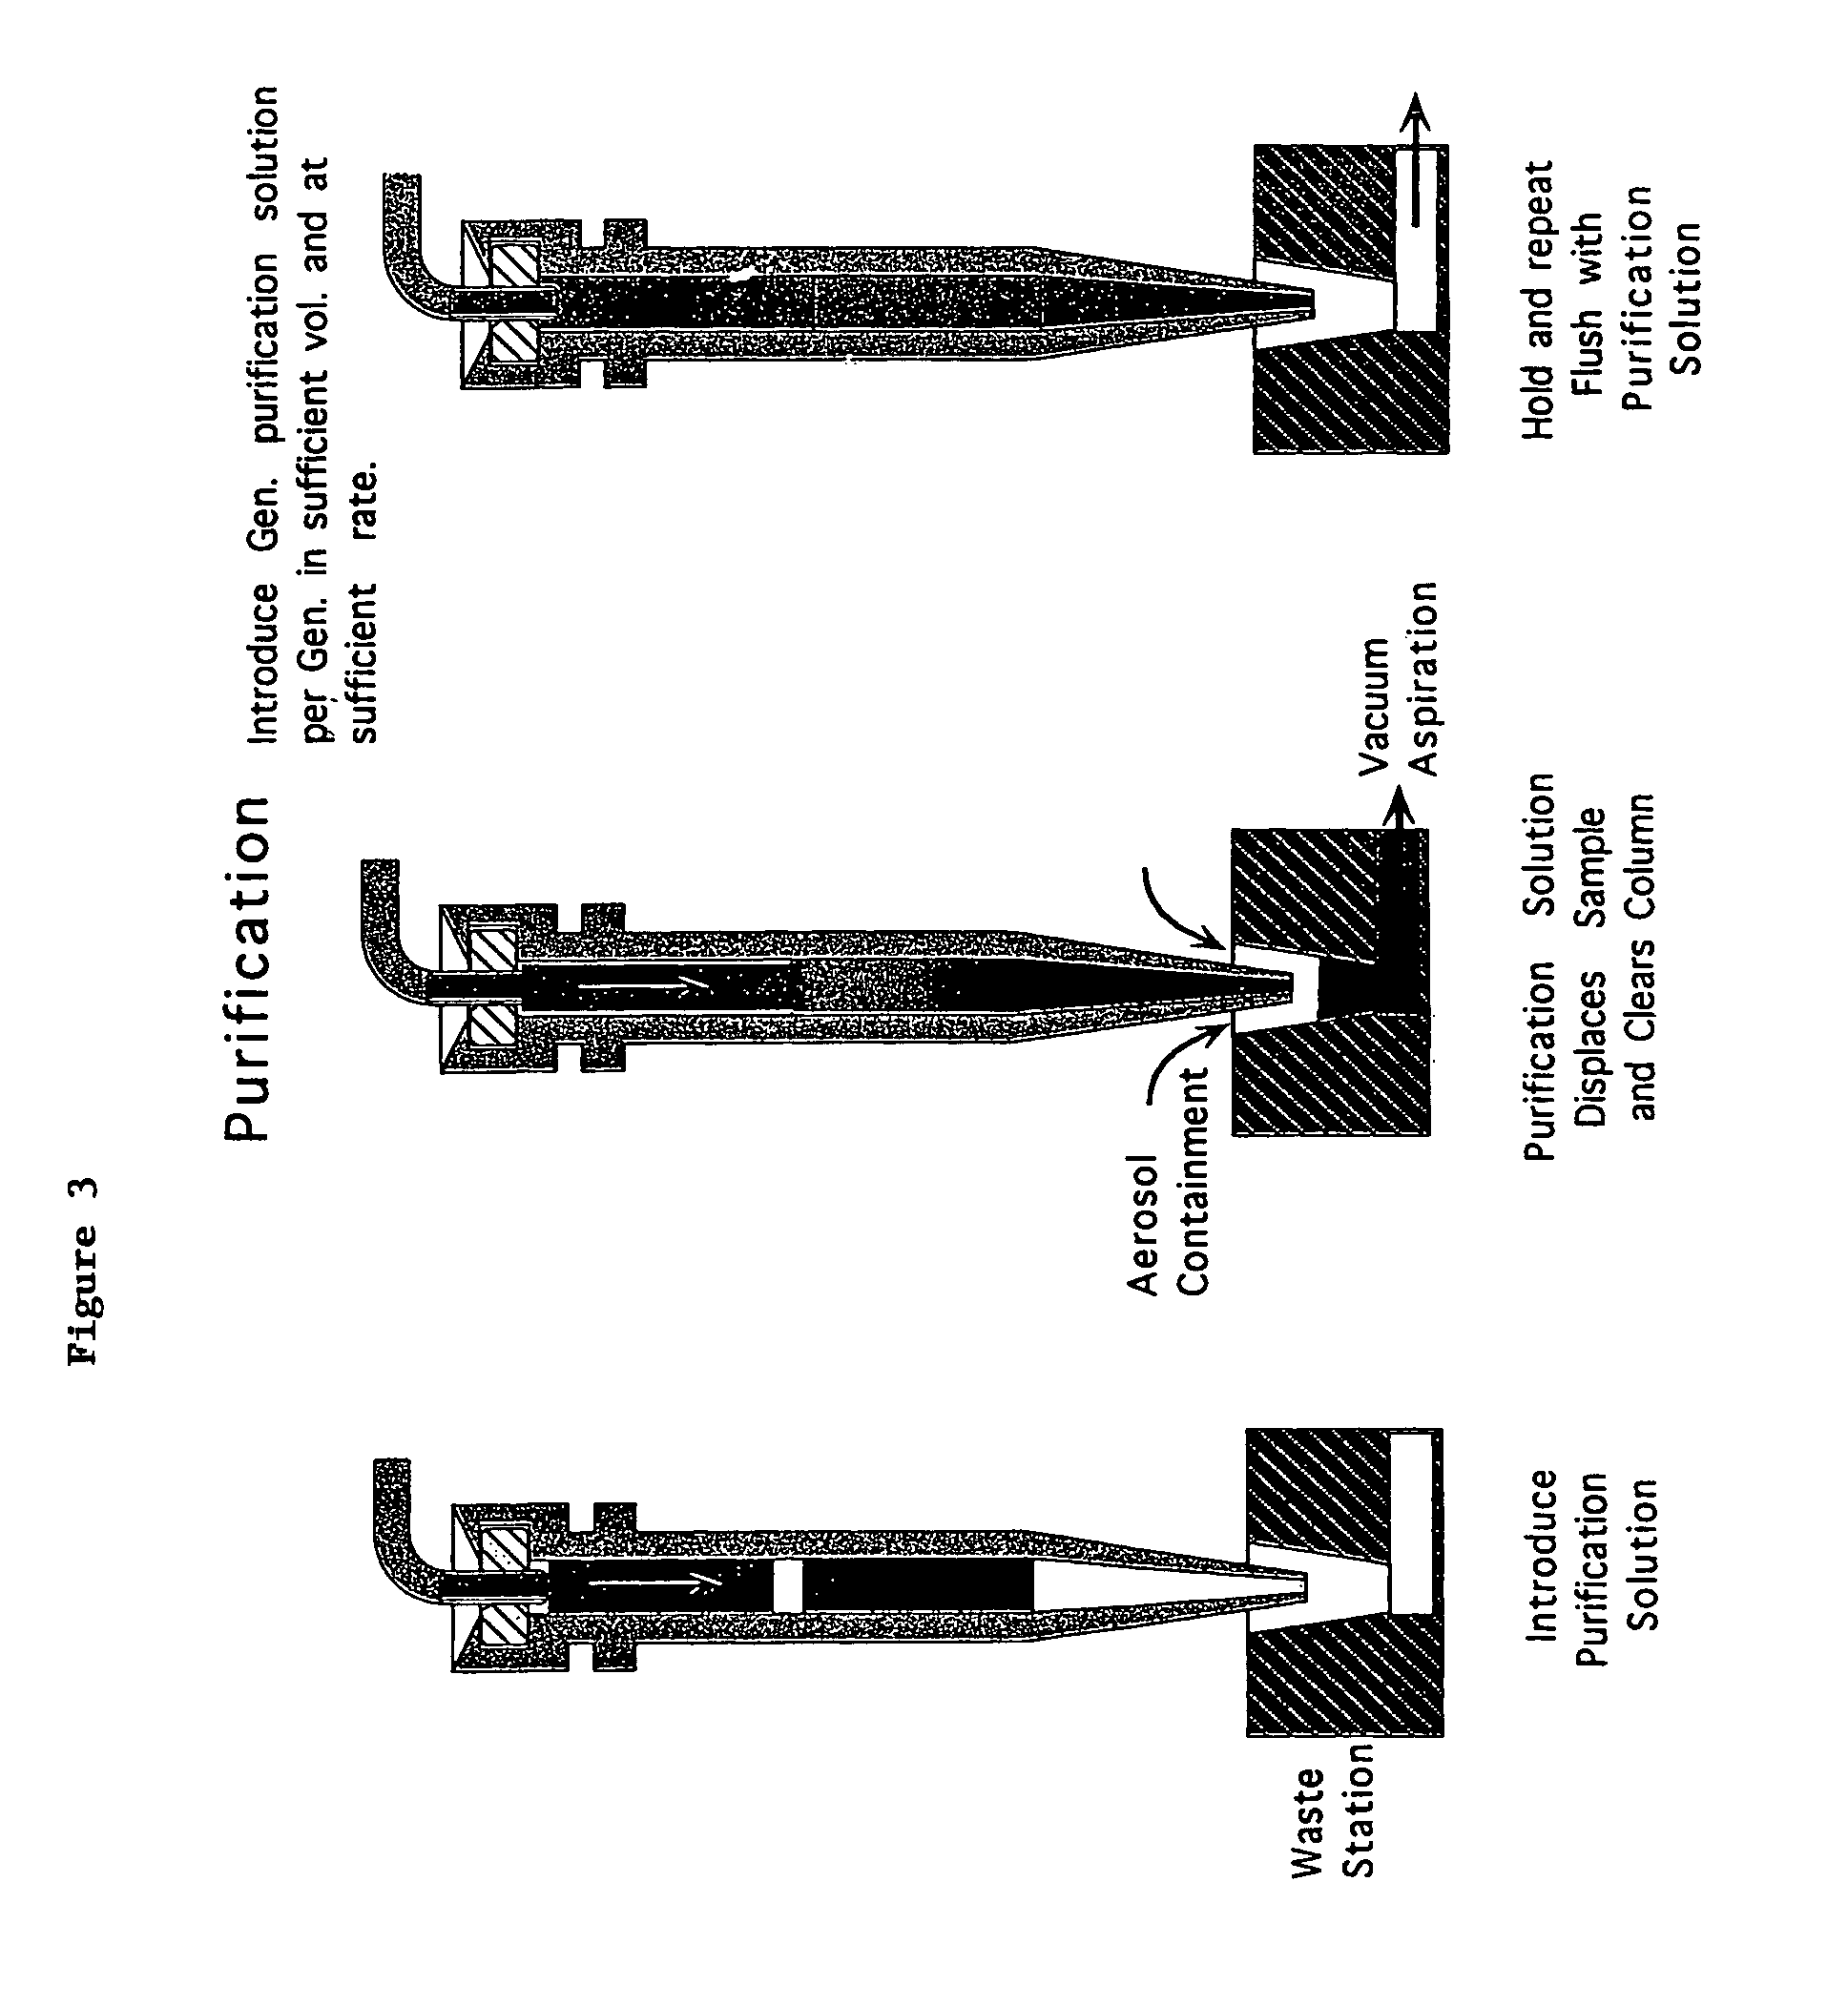 Apparatuses and methods for isolating nucleic acid